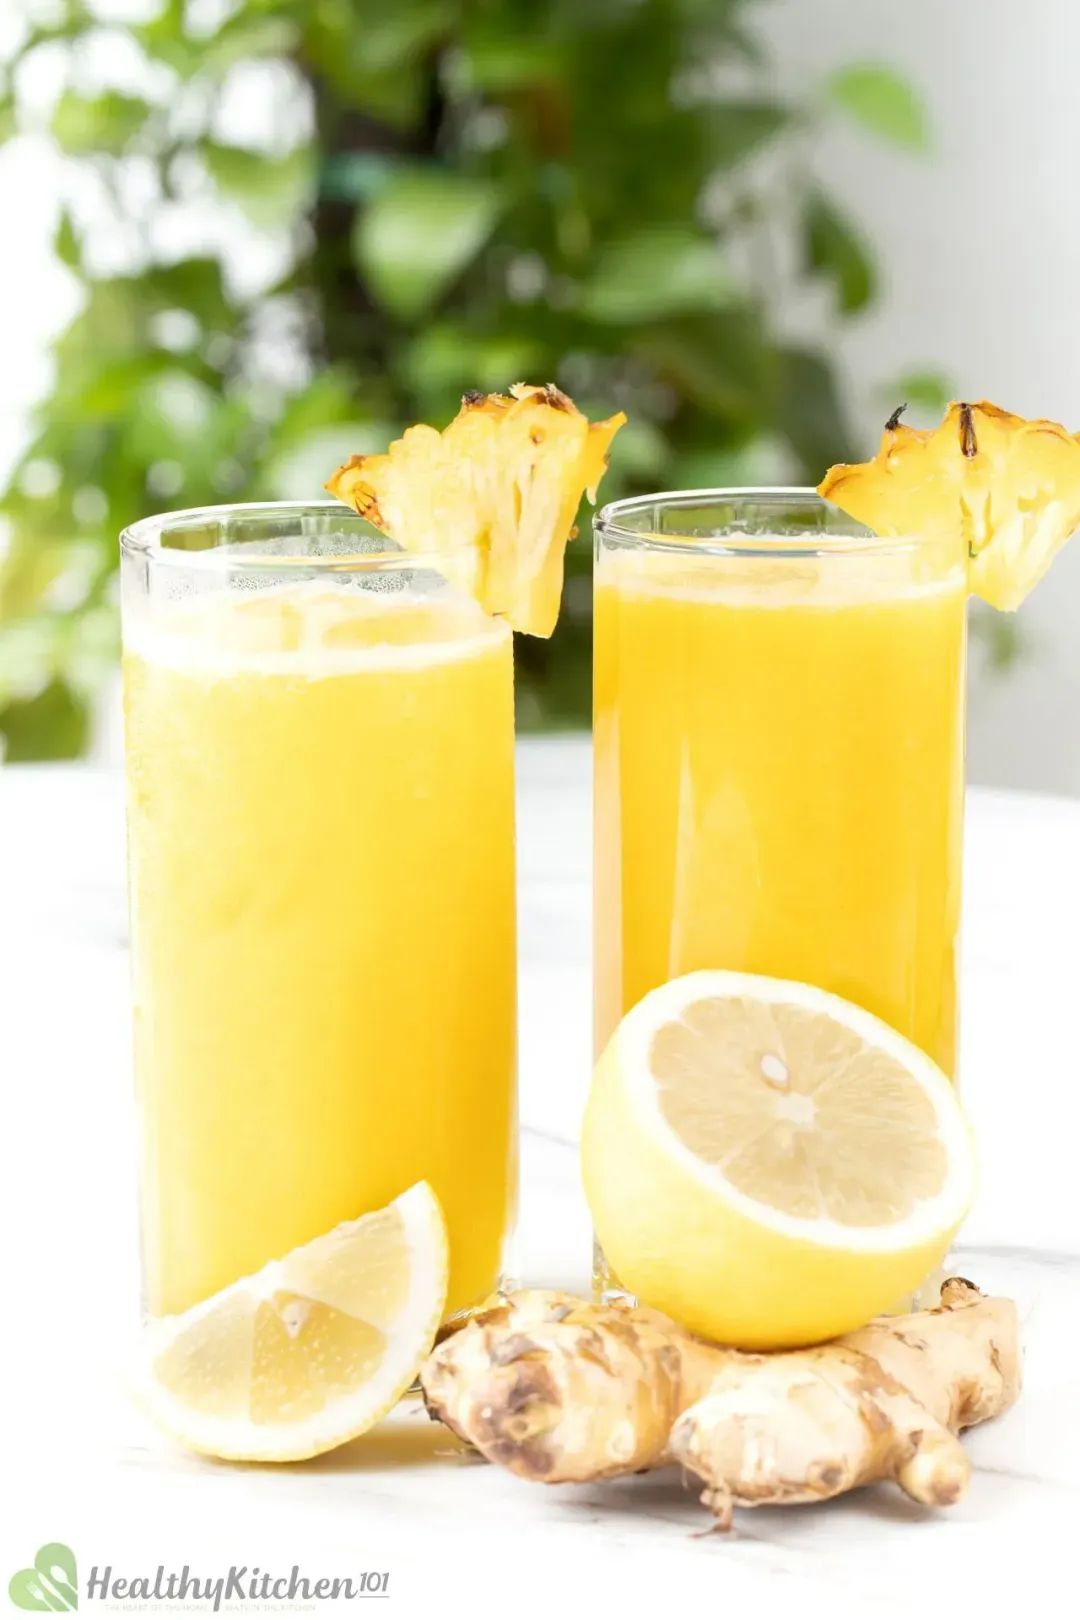 Calories in pineapple and mango juice